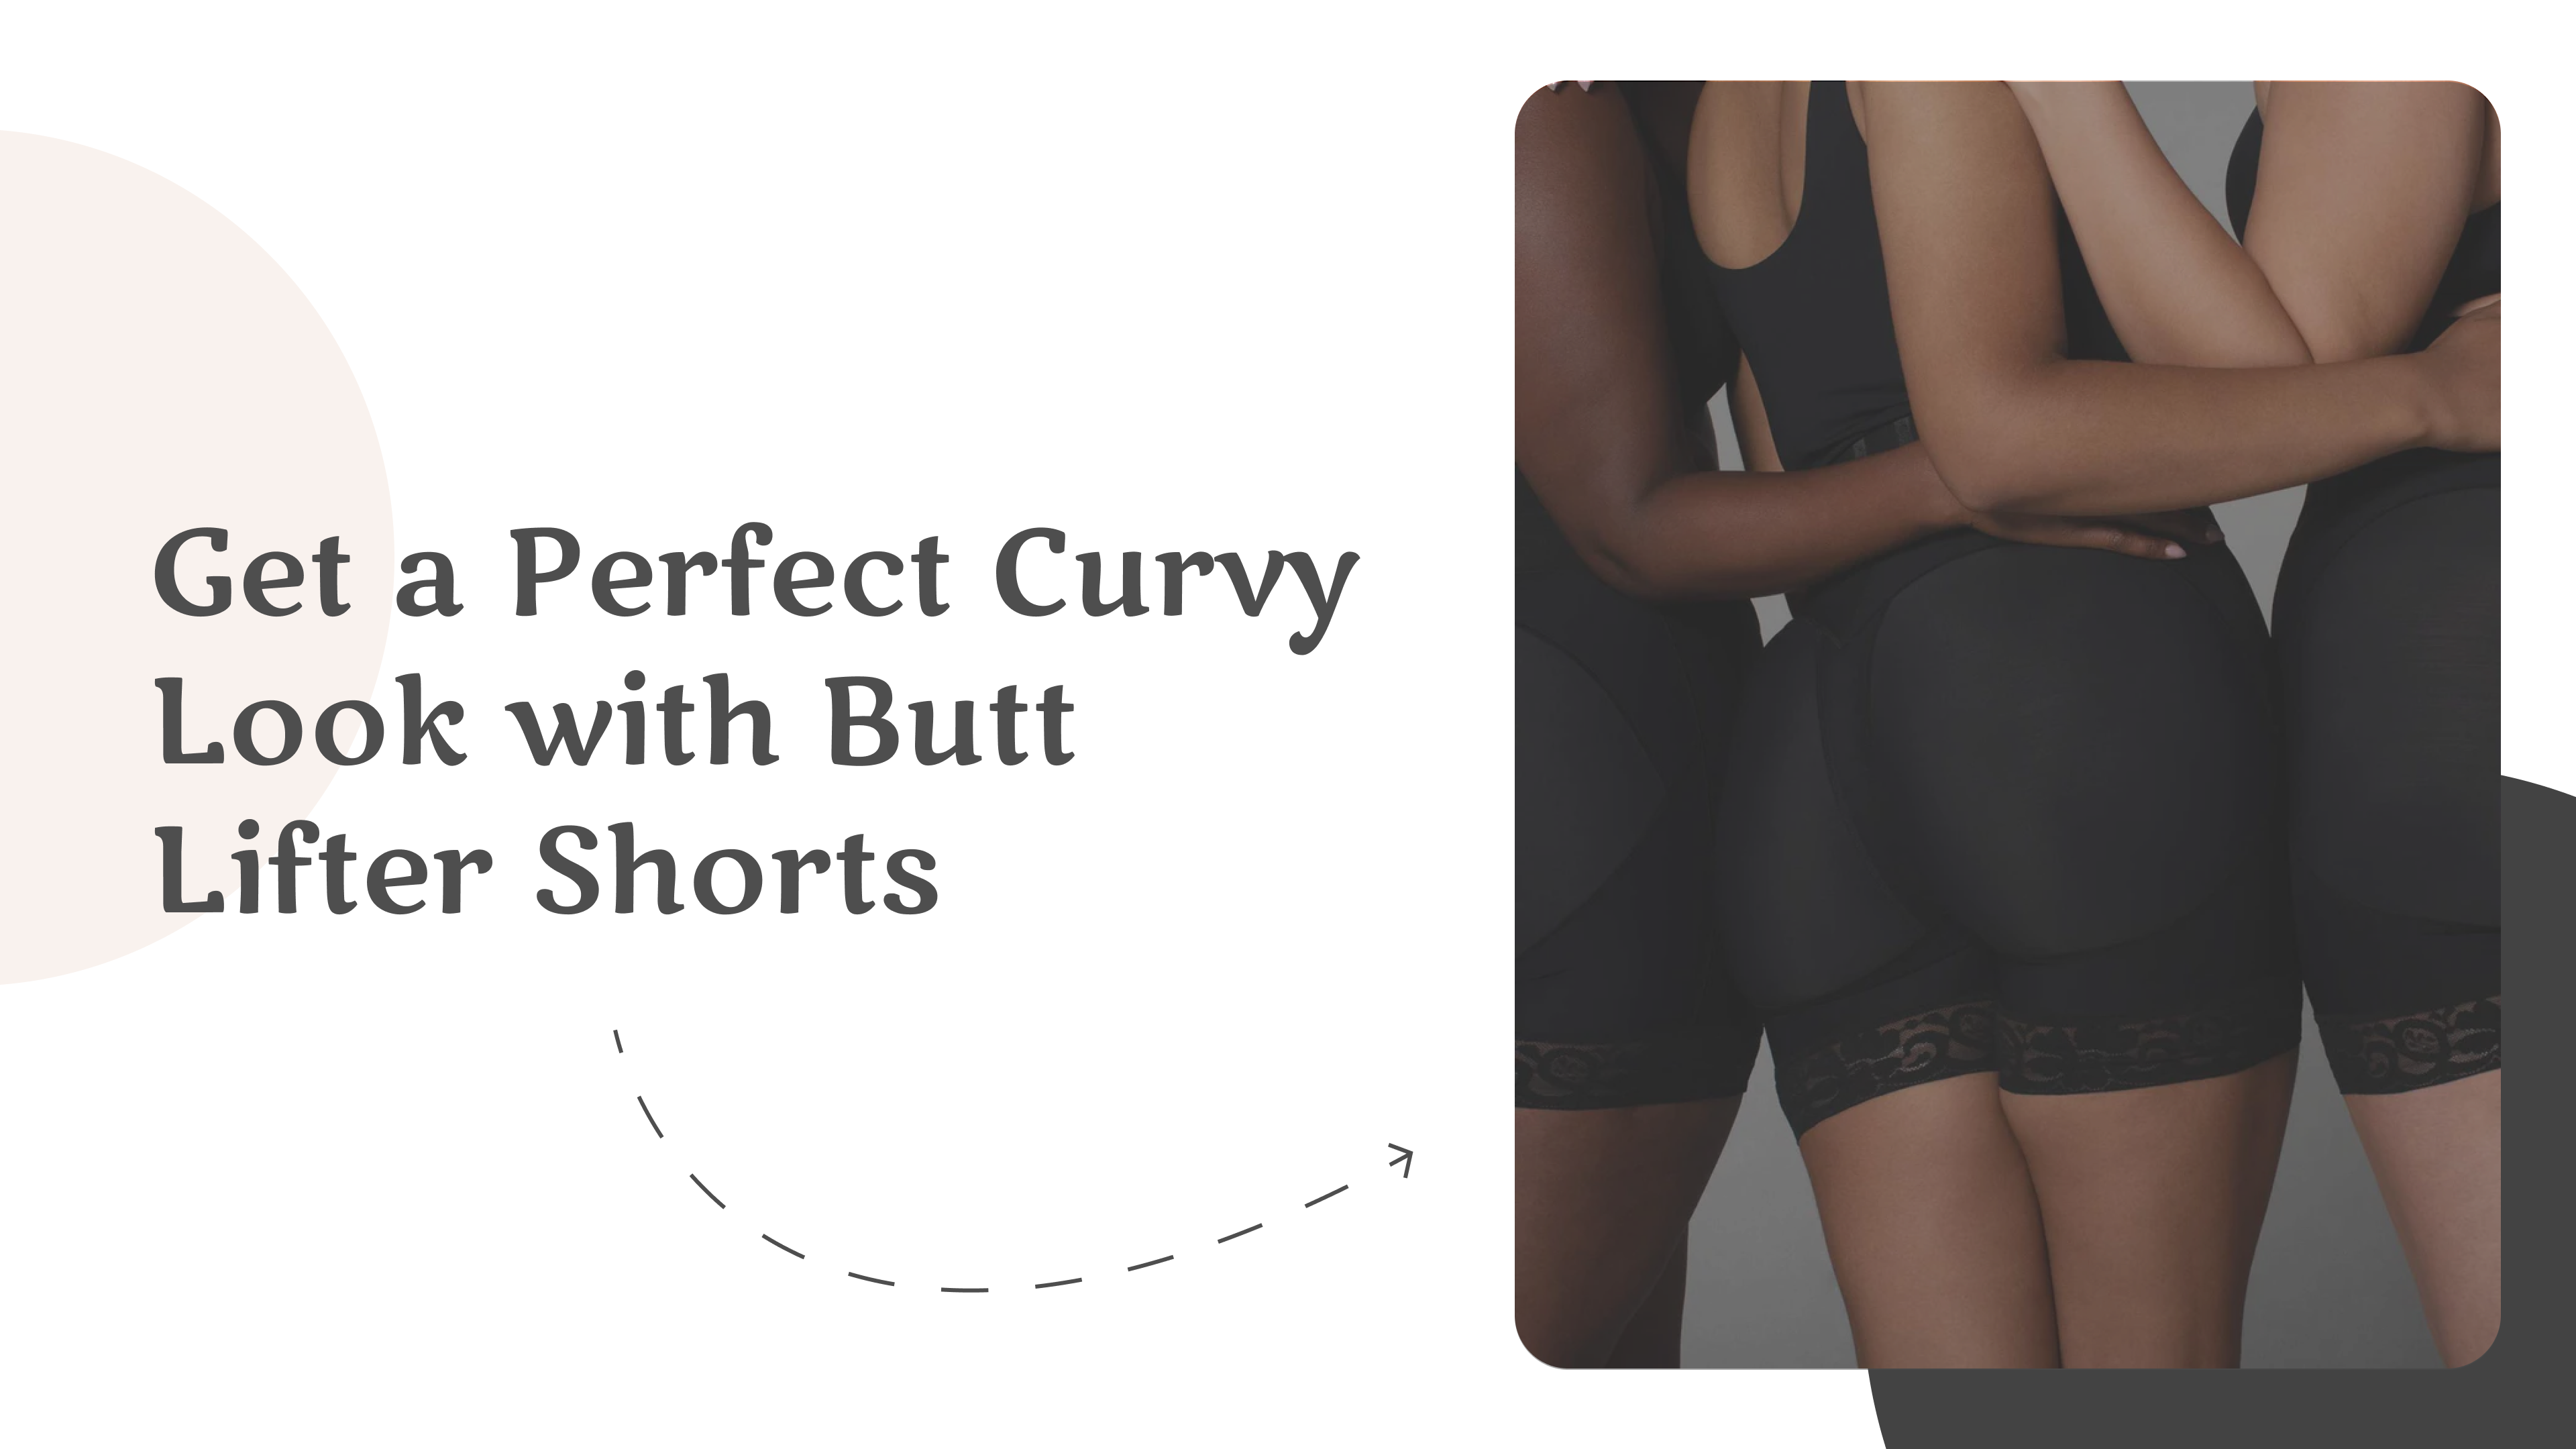 Get a Perfect Curvy Look with Butt Lifter Shorts - A Complete Guide